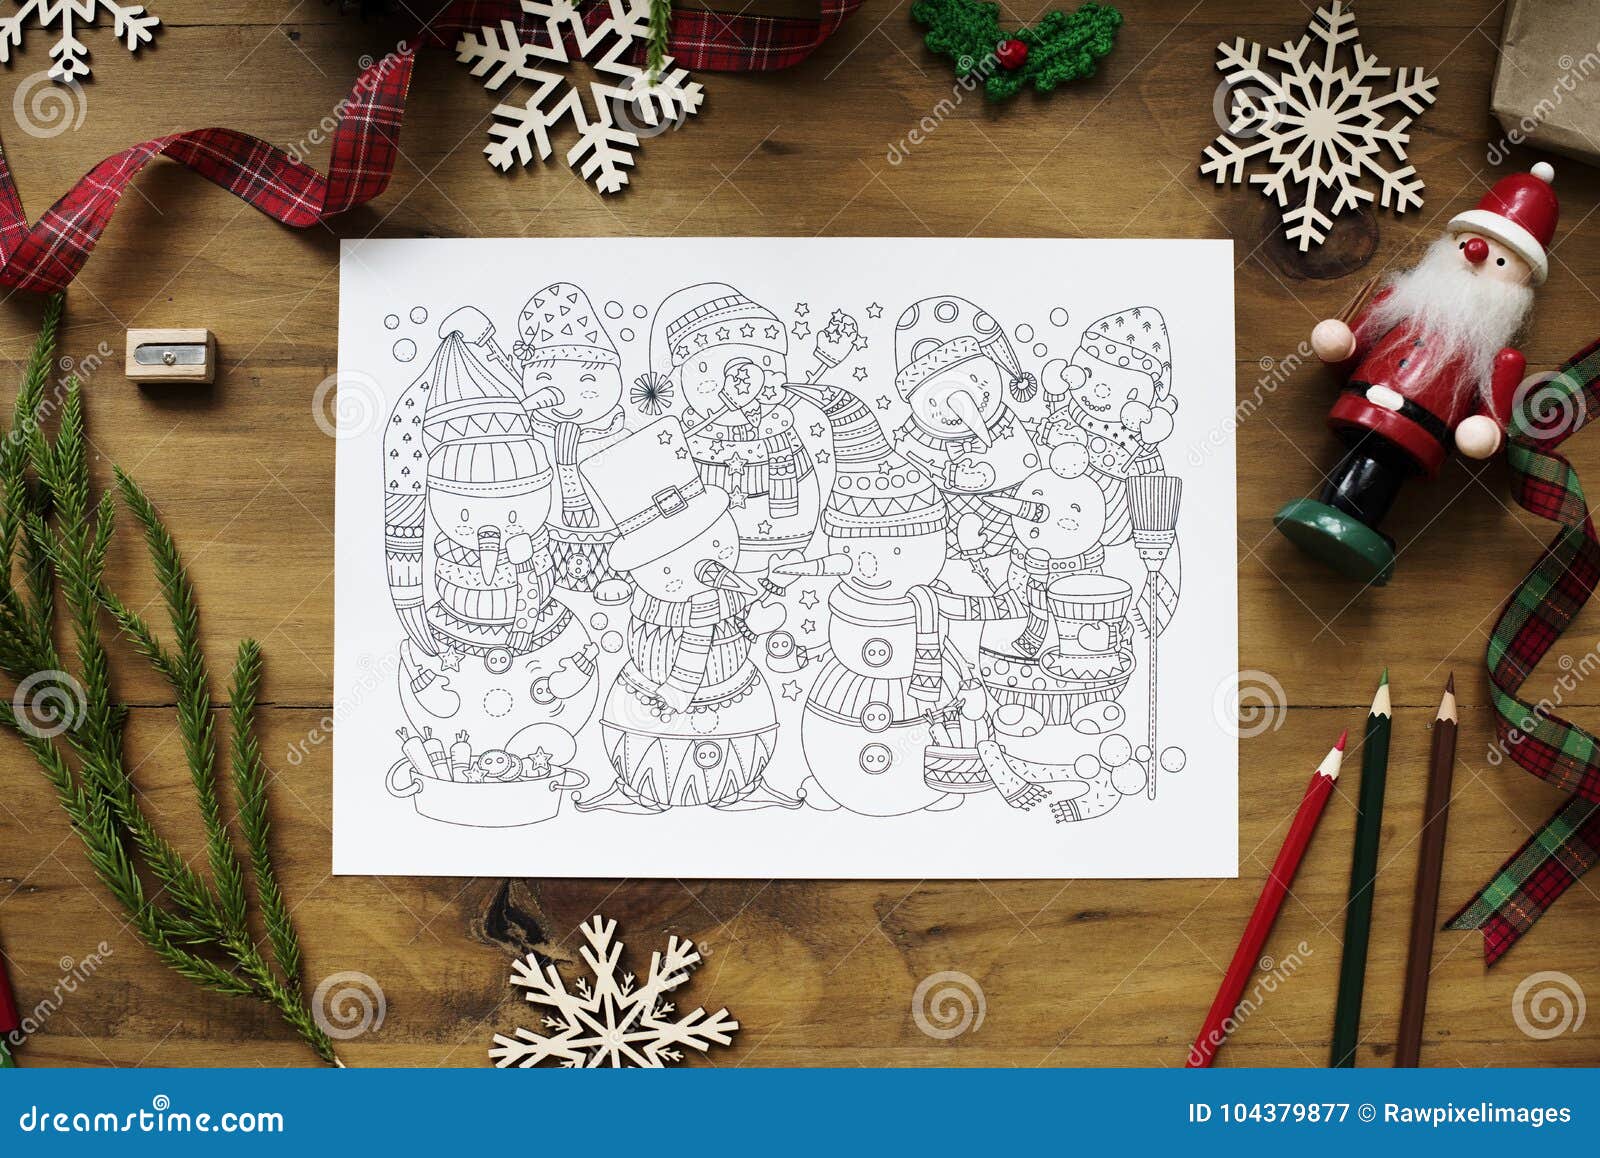 Aerial View of Christmas Drawing Coloring Book Stock Image - Image ...